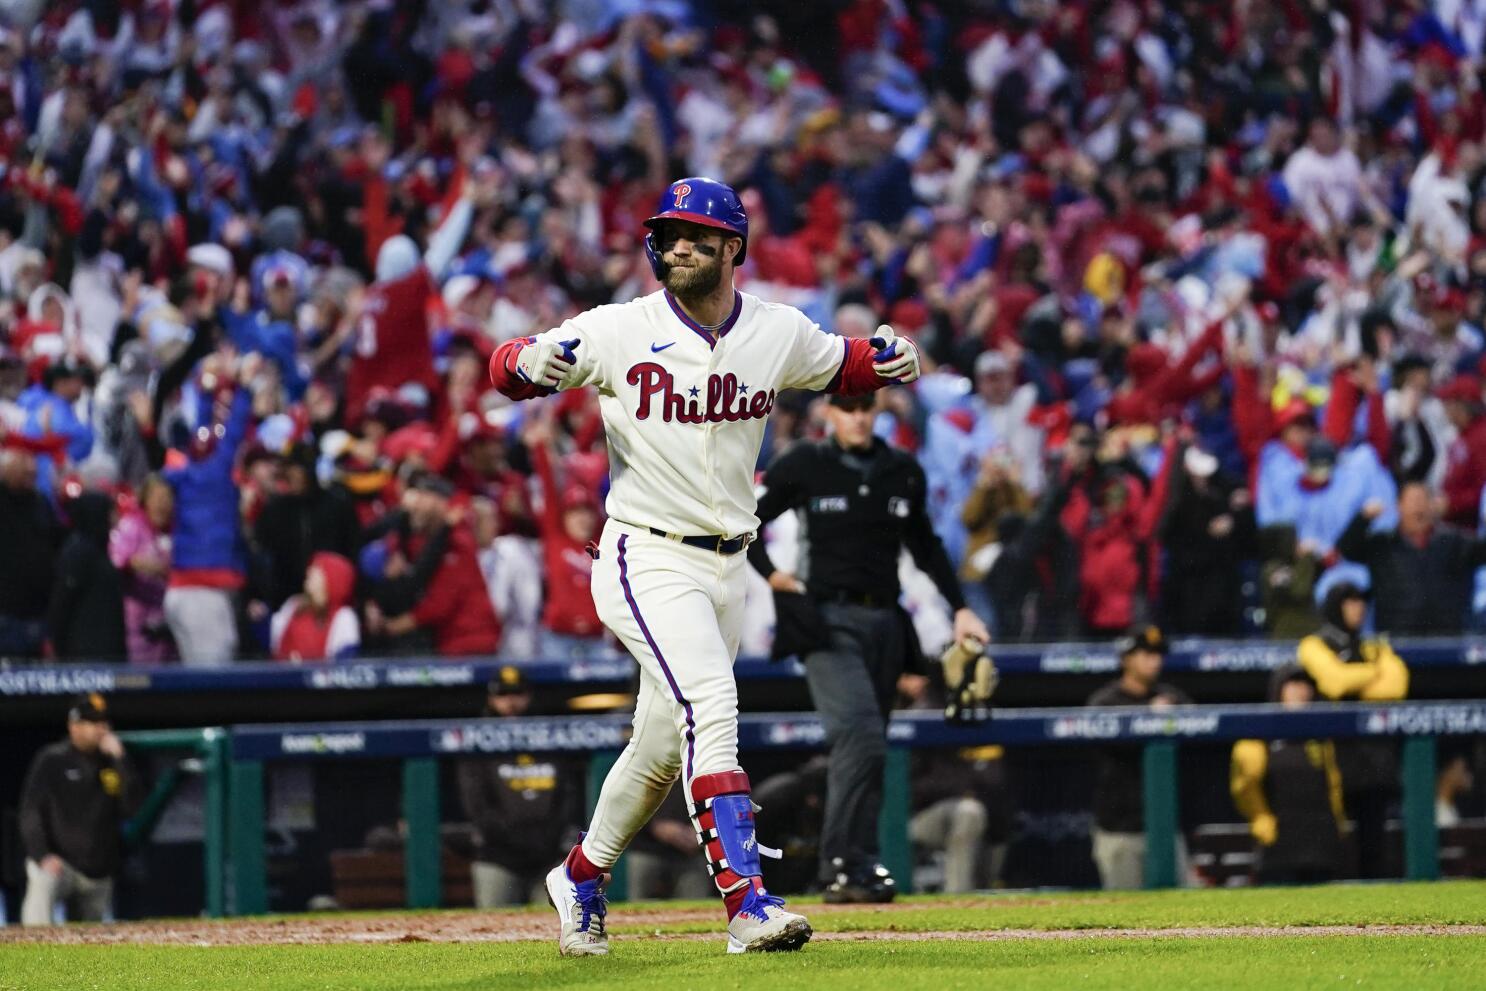 Bell rings during a homerun by the Phillies! - Picture of Citizens Bank  Park, Philadelphia - Tripadvisor